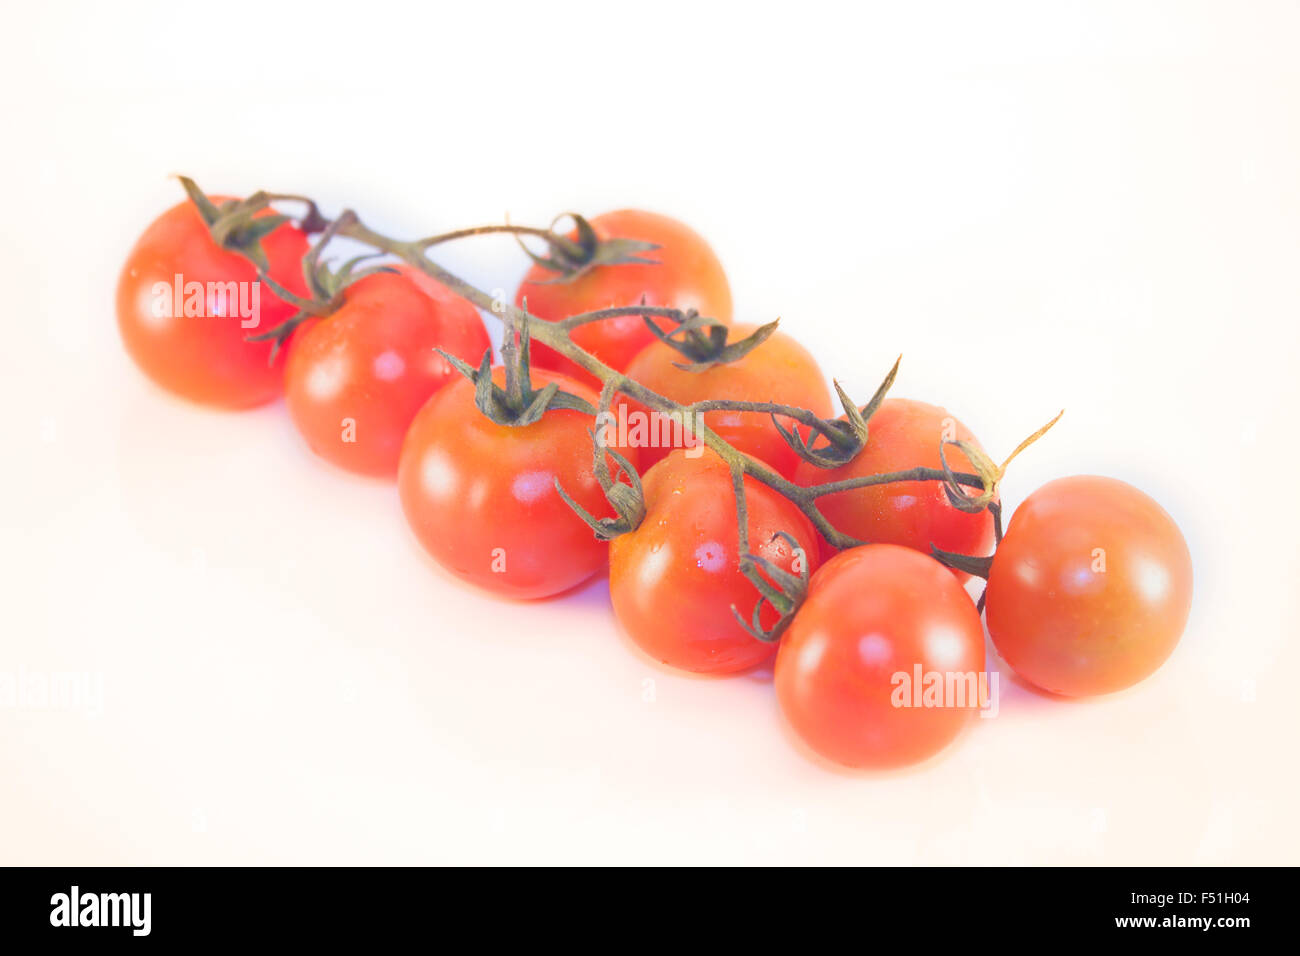 Small, red tomato cluster, isolated on white background Stock Photo